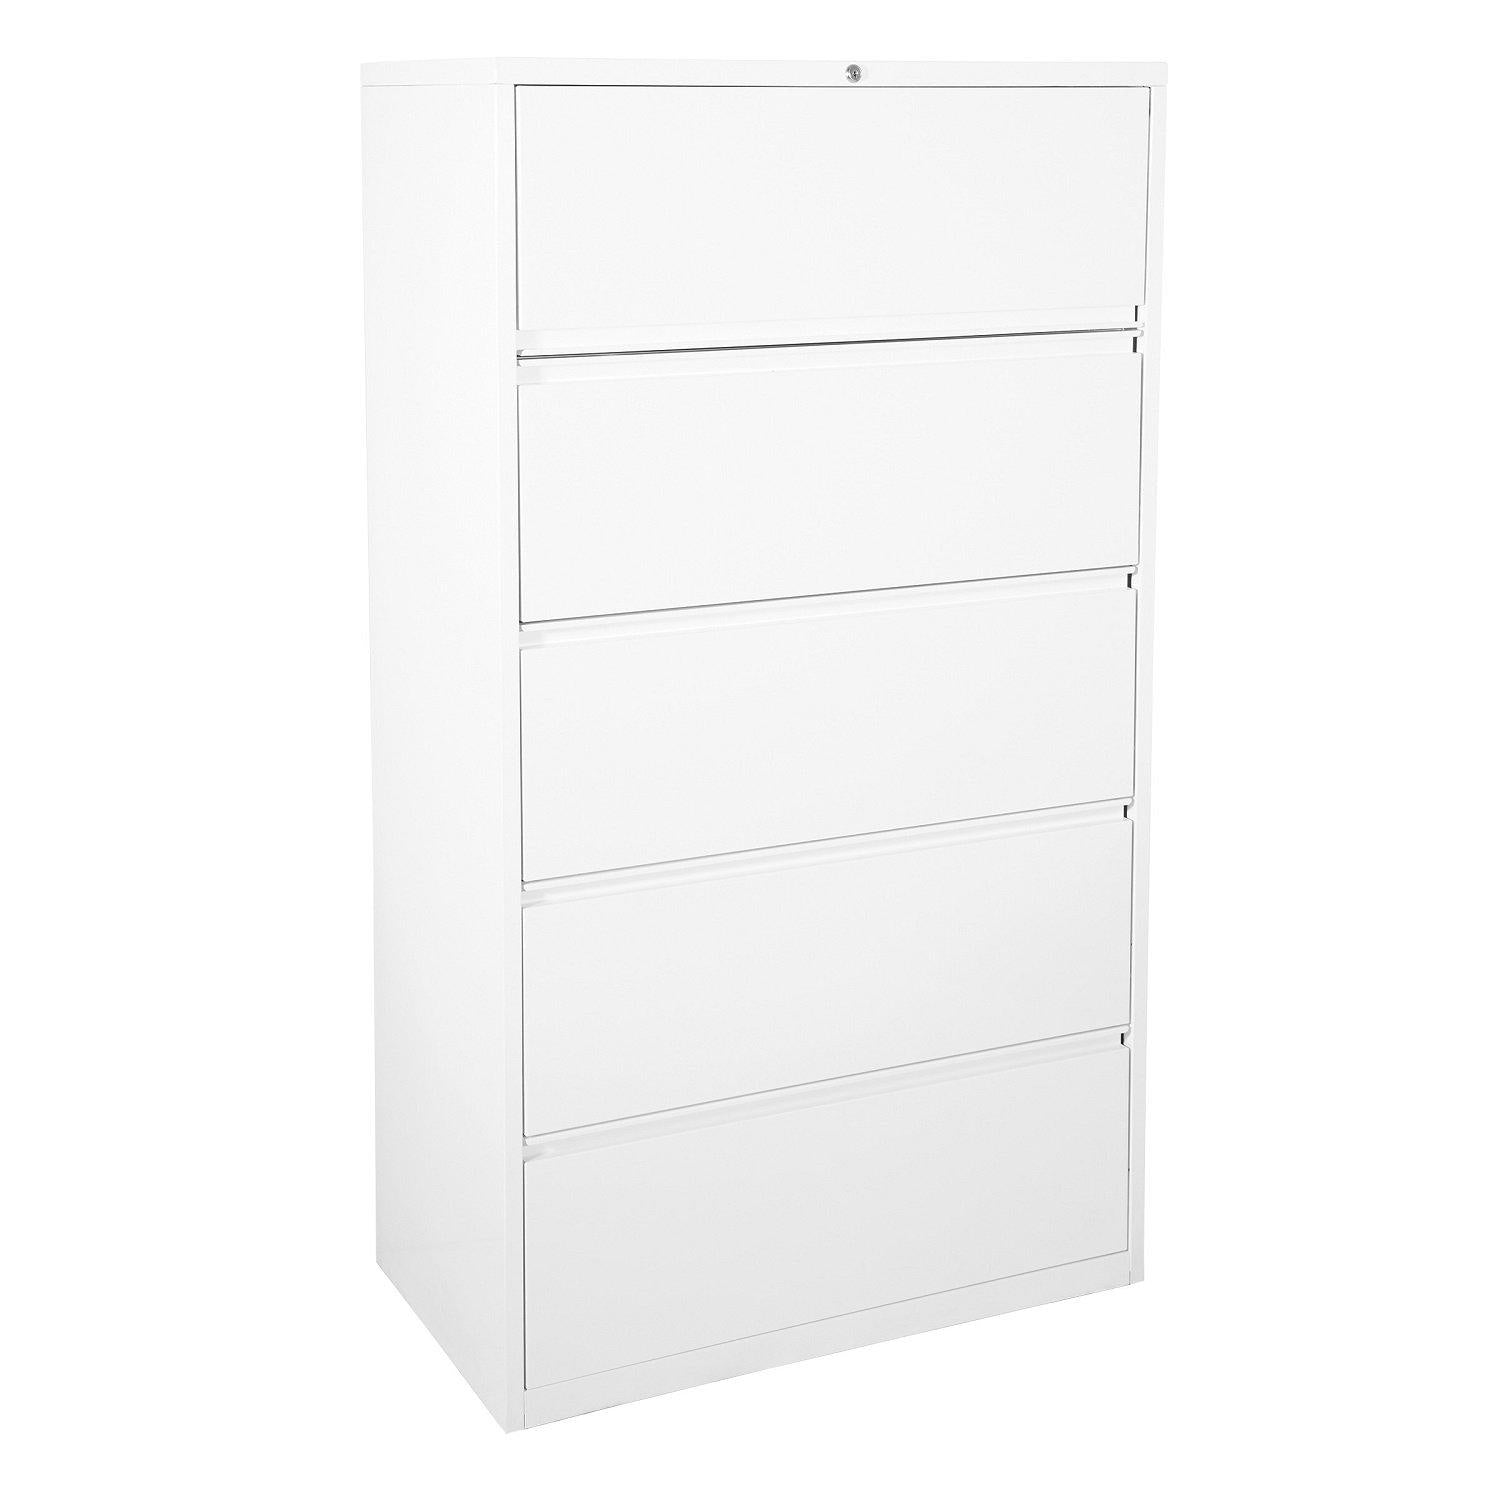 Heavy-Duty Metal Lateral File, 36" Wide, 5 Drawers